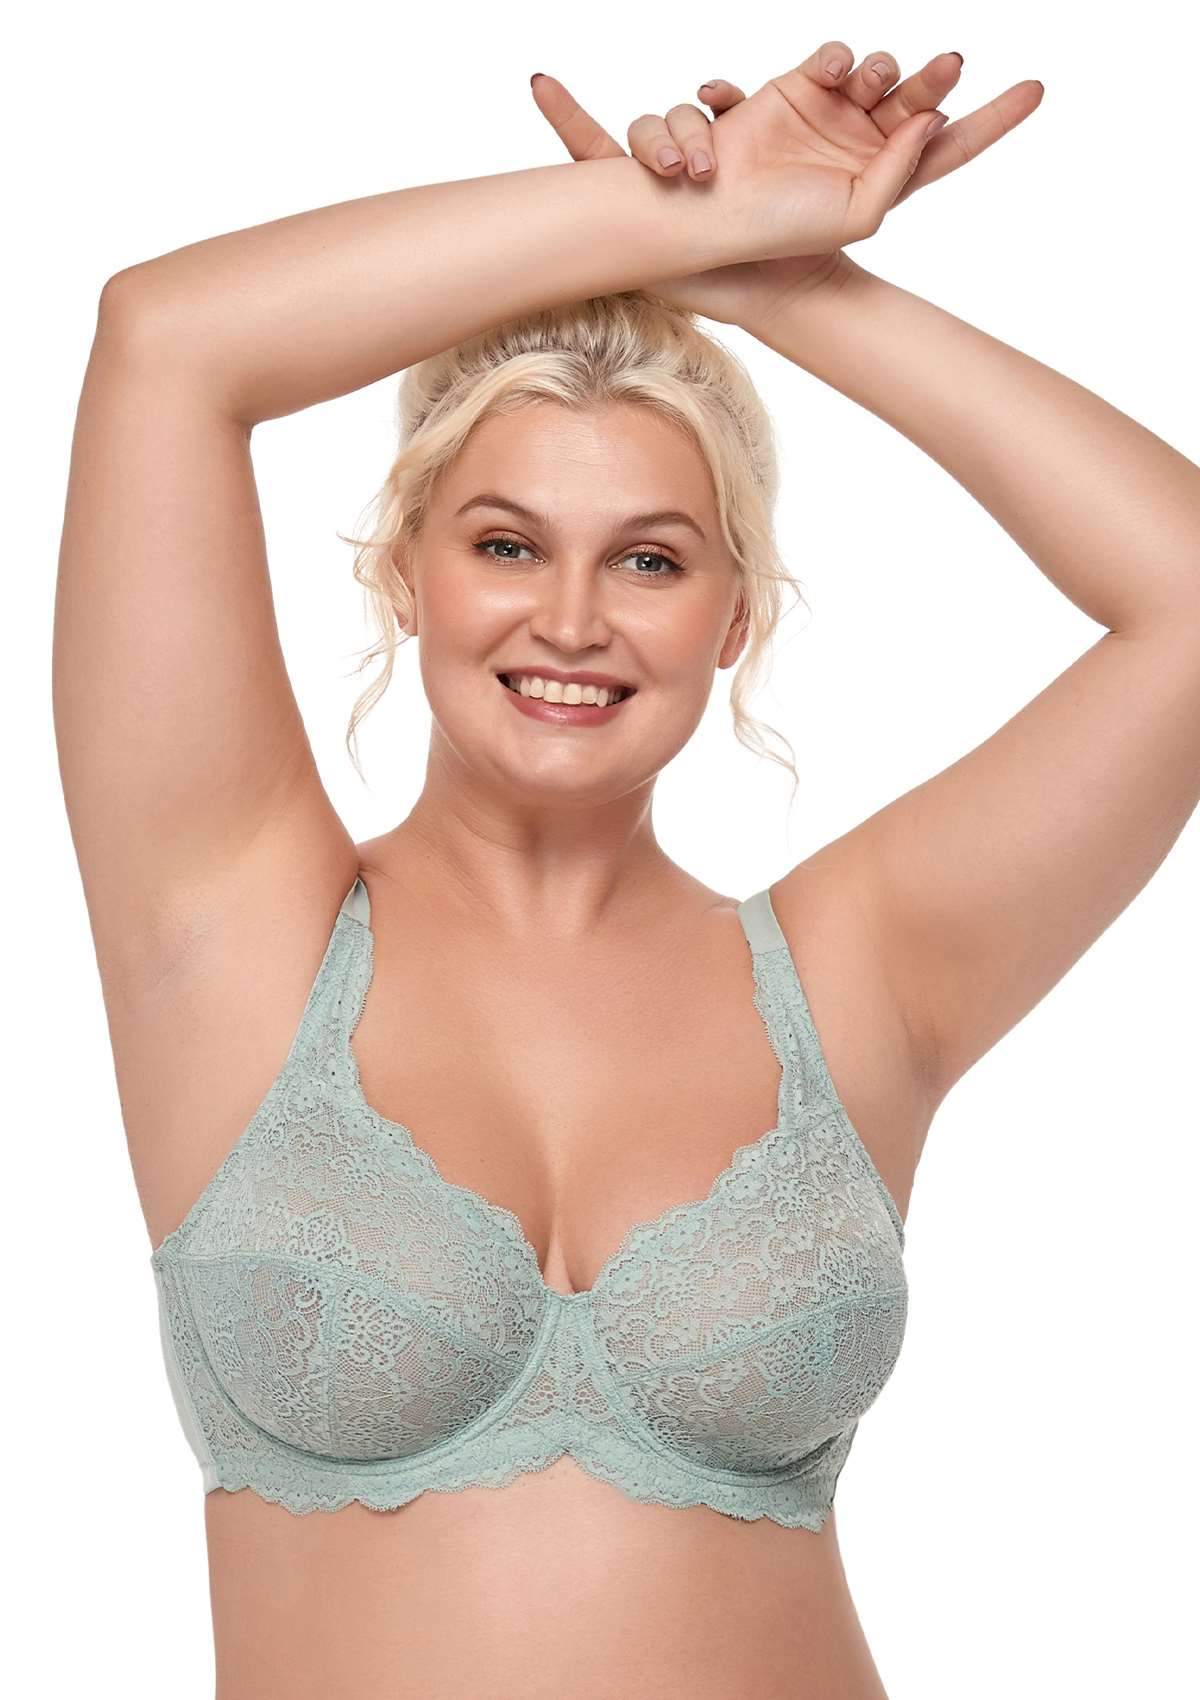 HSIA All-Over Floral Lace: Best Bra For Elderly With Sagging Breasts - Crystal Blue / 36 / D